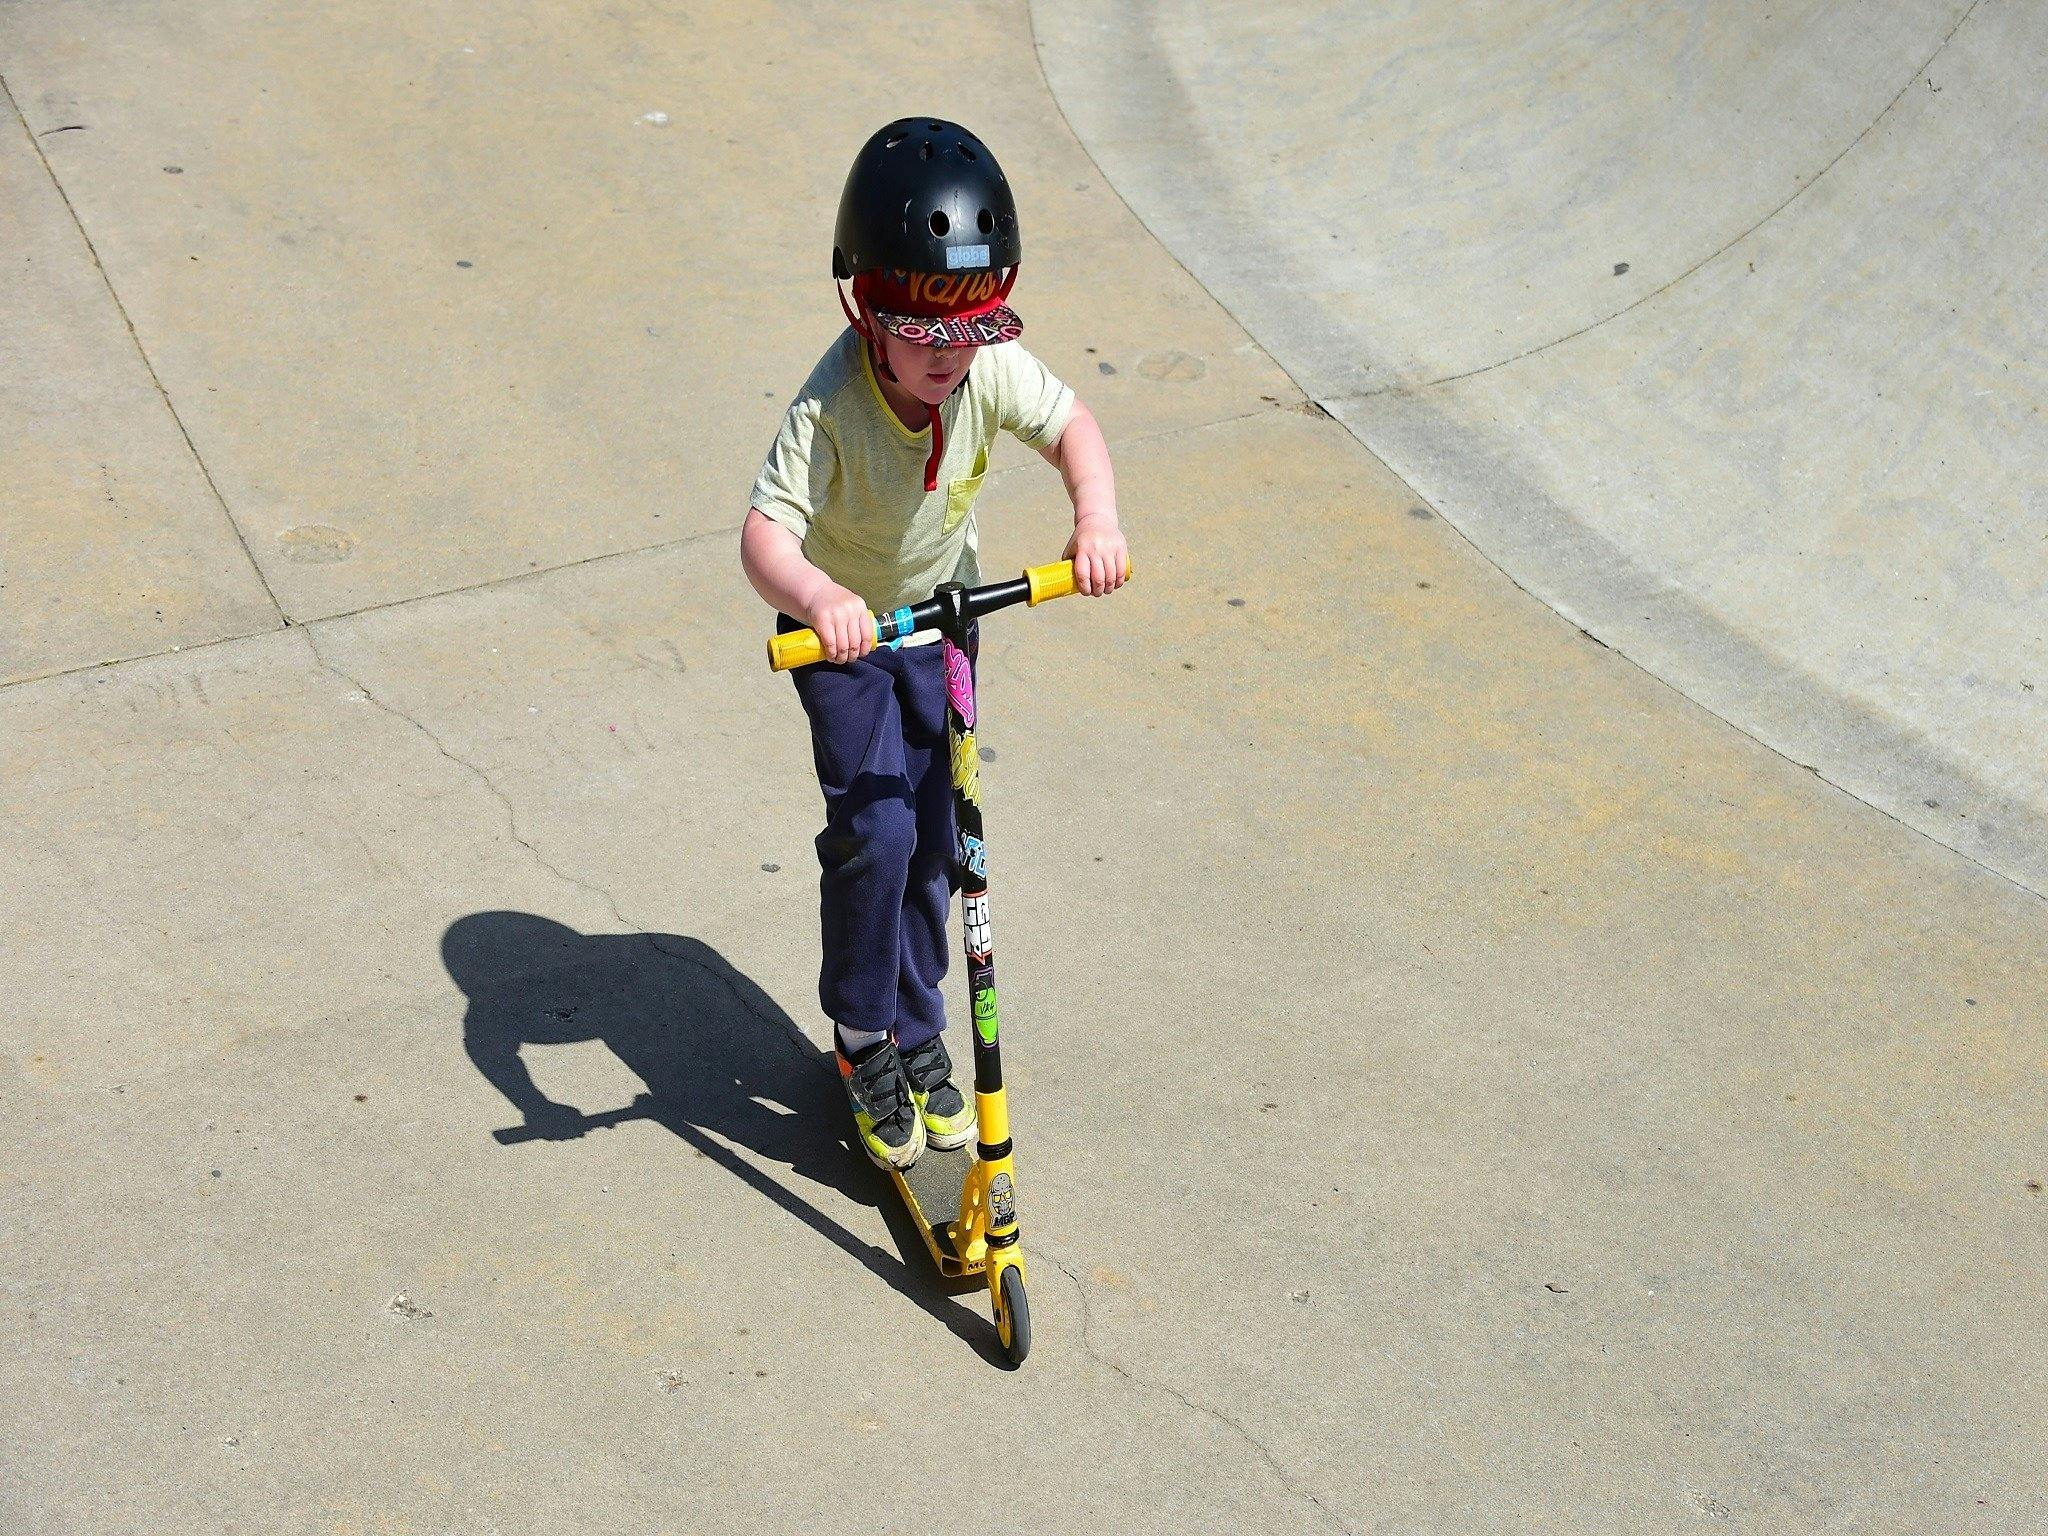 Child on Scooter